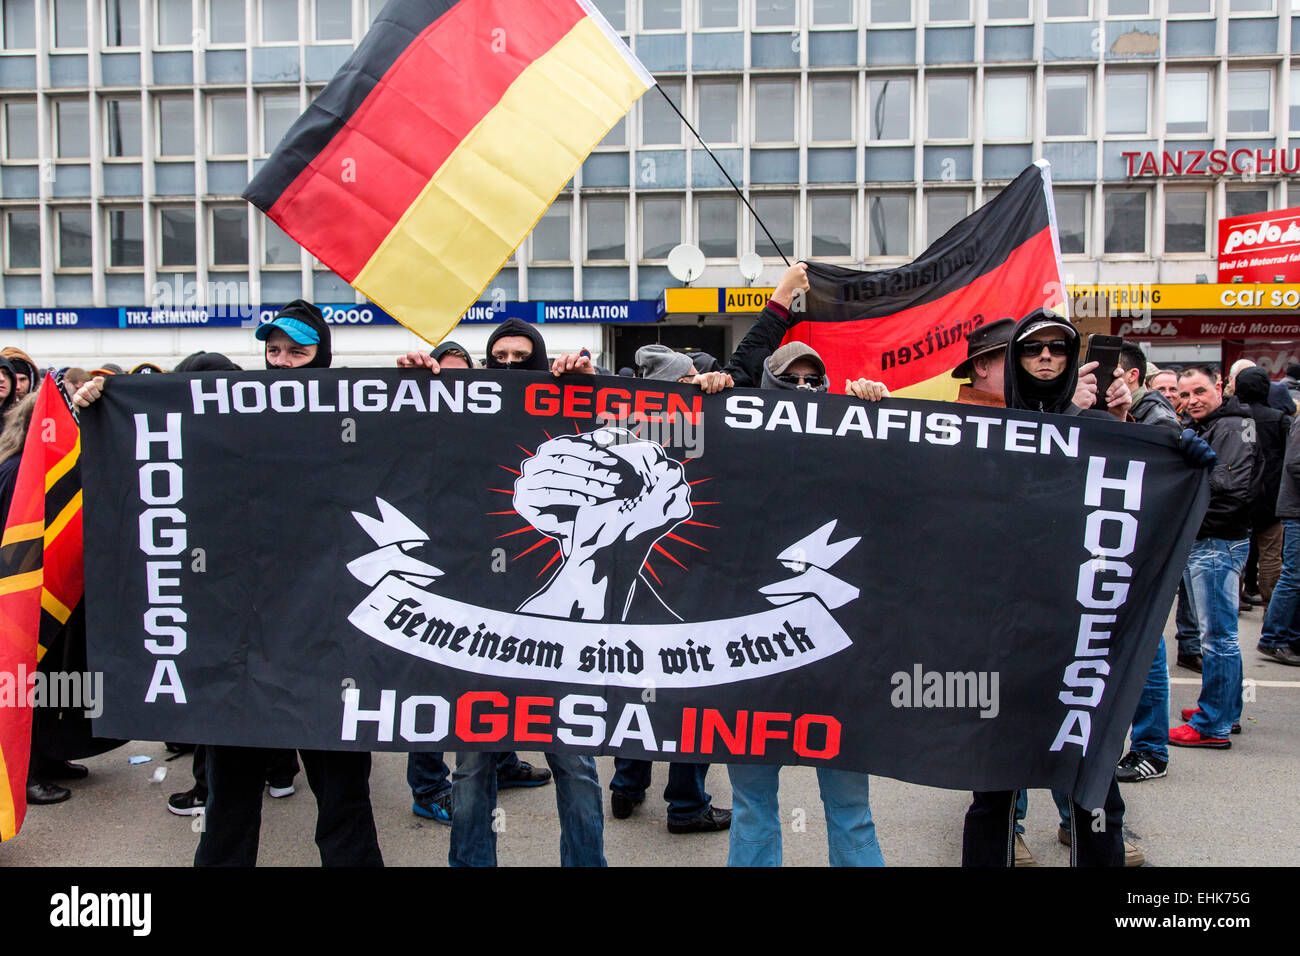 Demonstration of right wing PEGIDA organization, together with violent Hooligans, against a meeting of Islamic Salafist groups Stock Photo